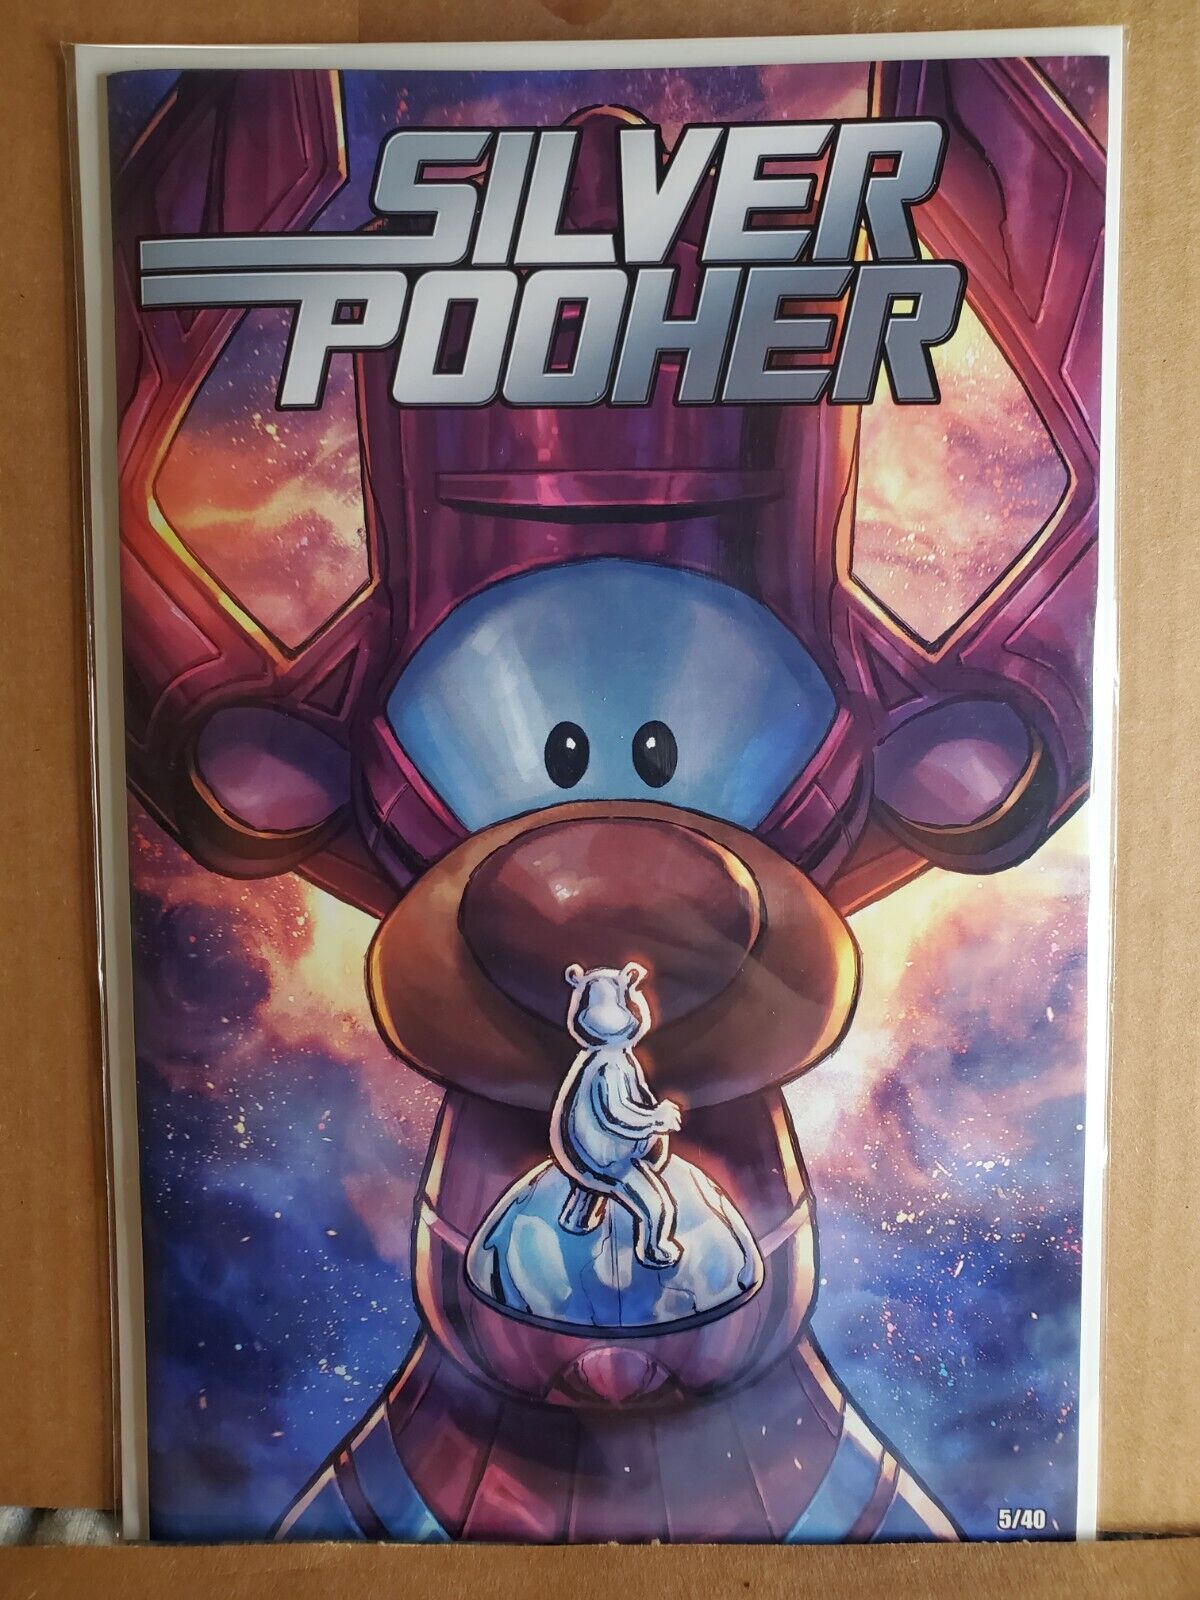 Do You Pooh -  Silver Pooher [ 5/40 ] Trade - Silver Surfer Homage